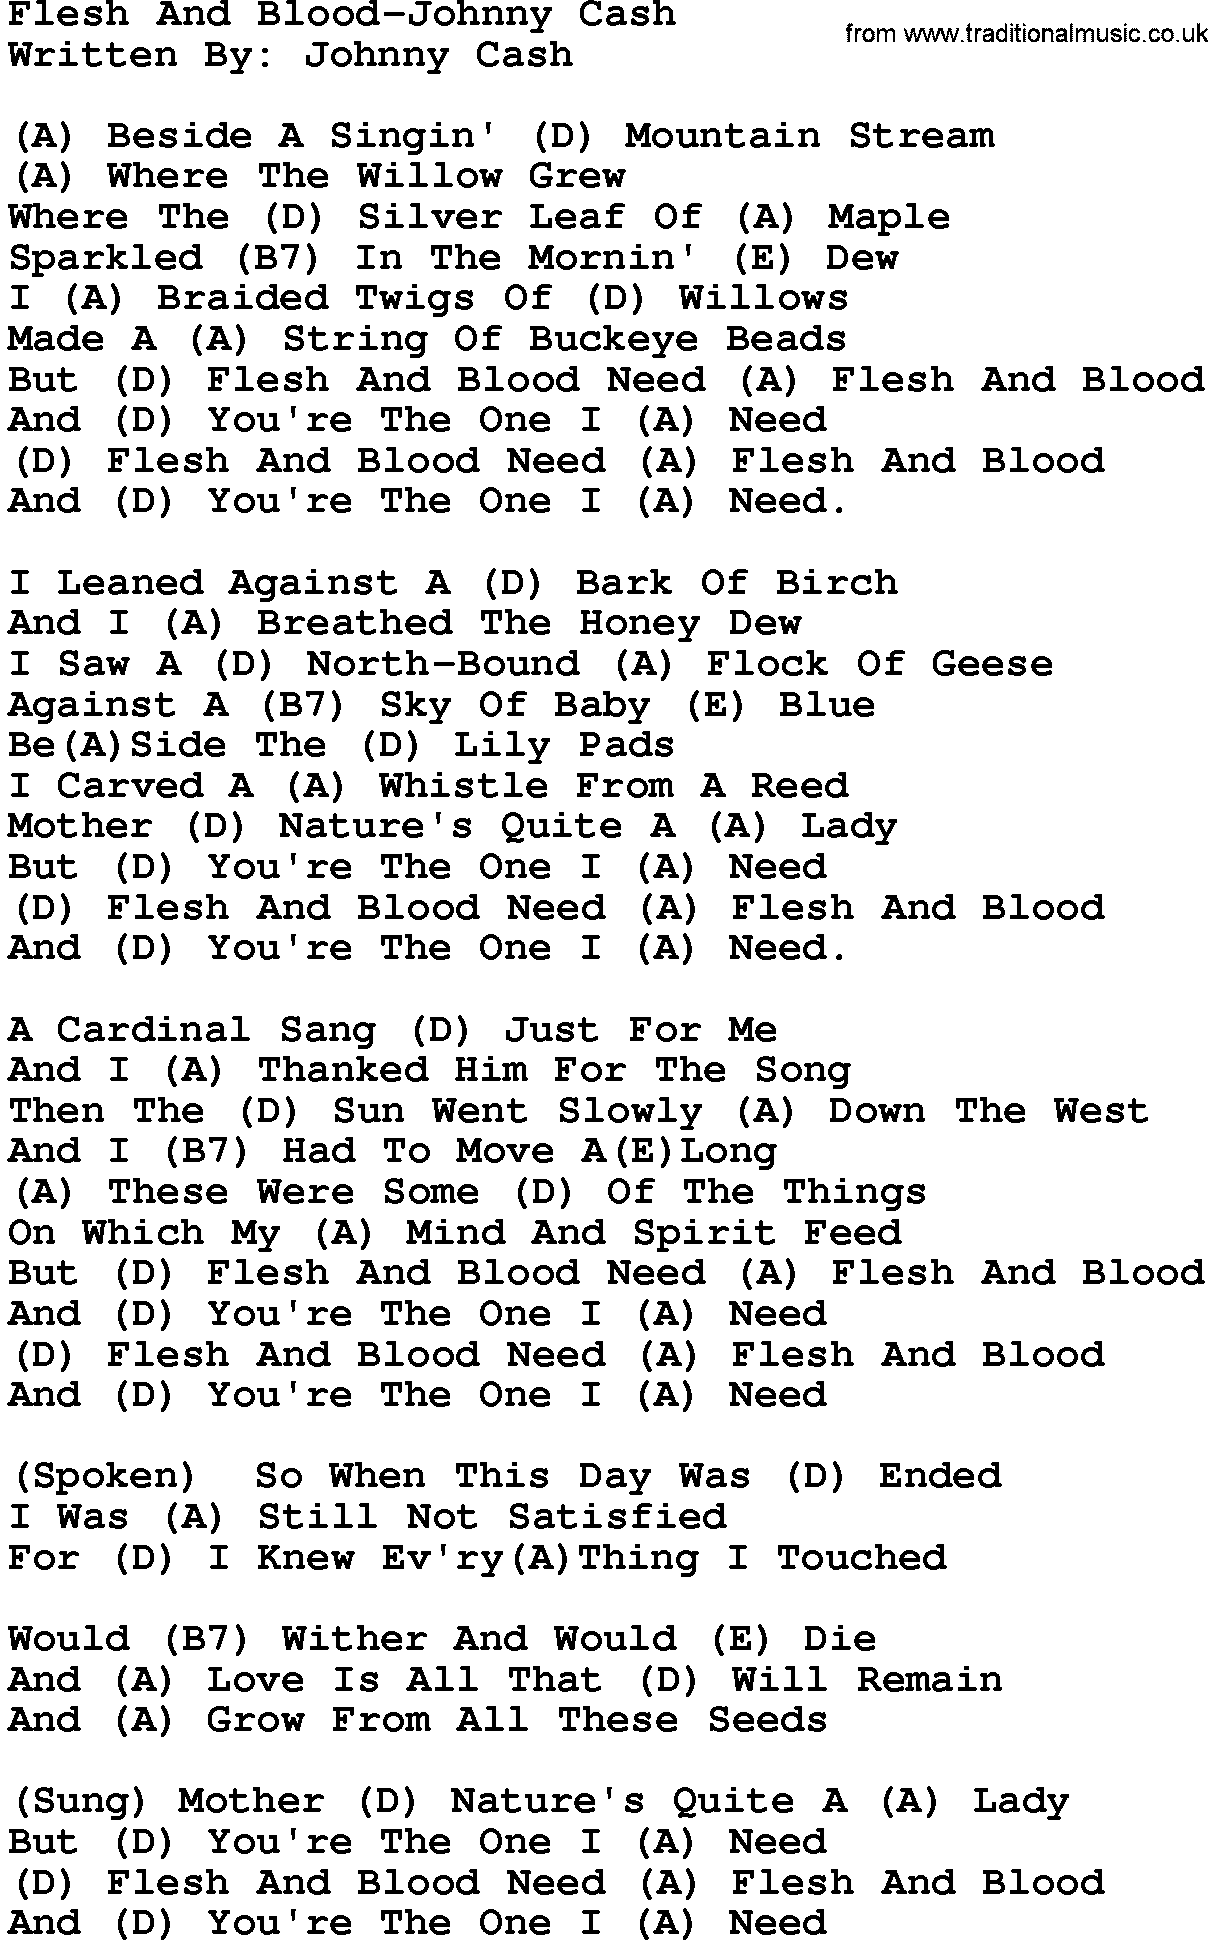 Country music song: Flesh And Blood-Johnny Cash lyrics and chords